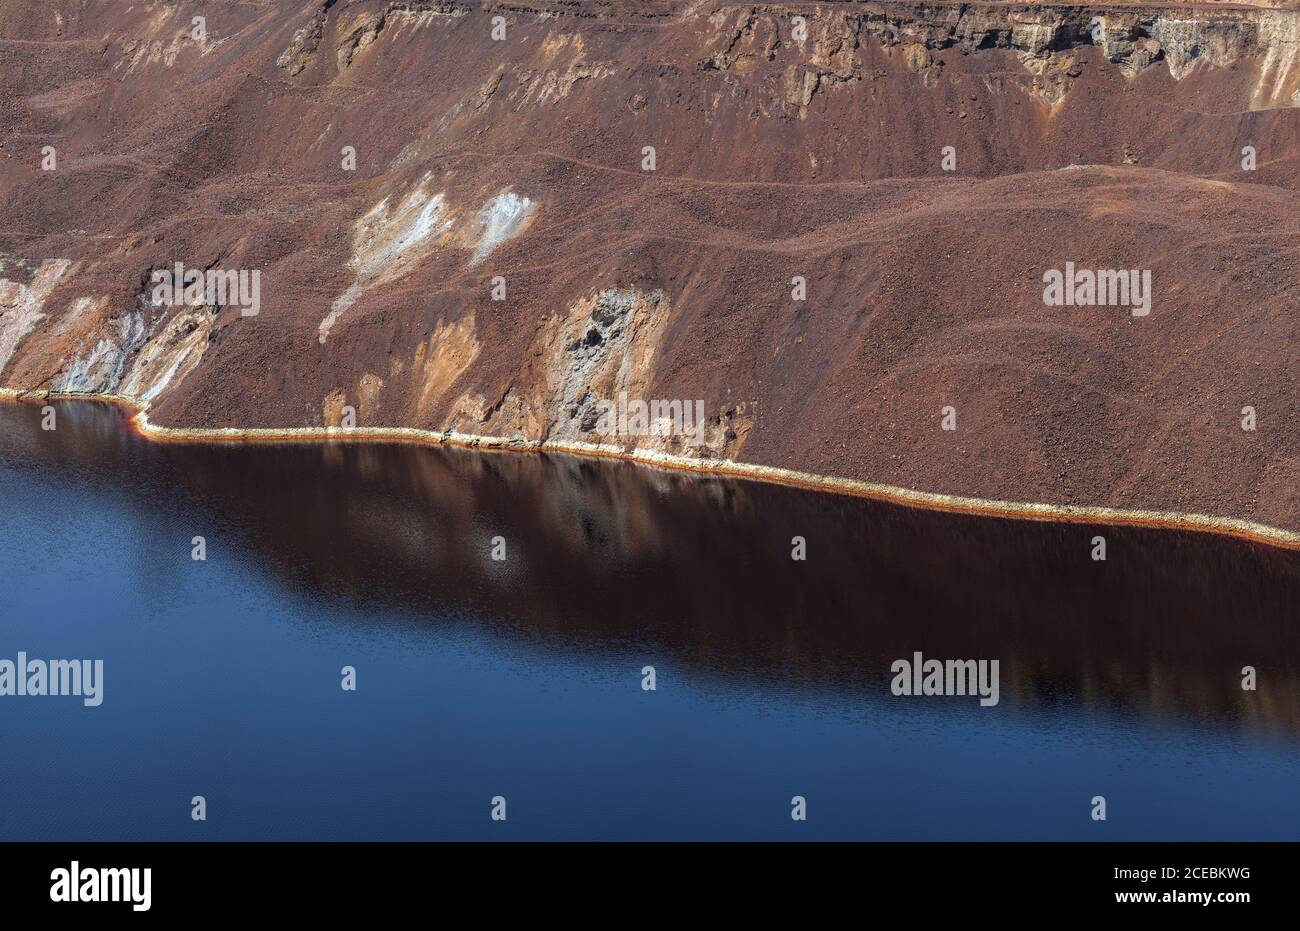 Calm surface of water near slope of quarry in Santo Domingos Mine, Portugal Stock Photo